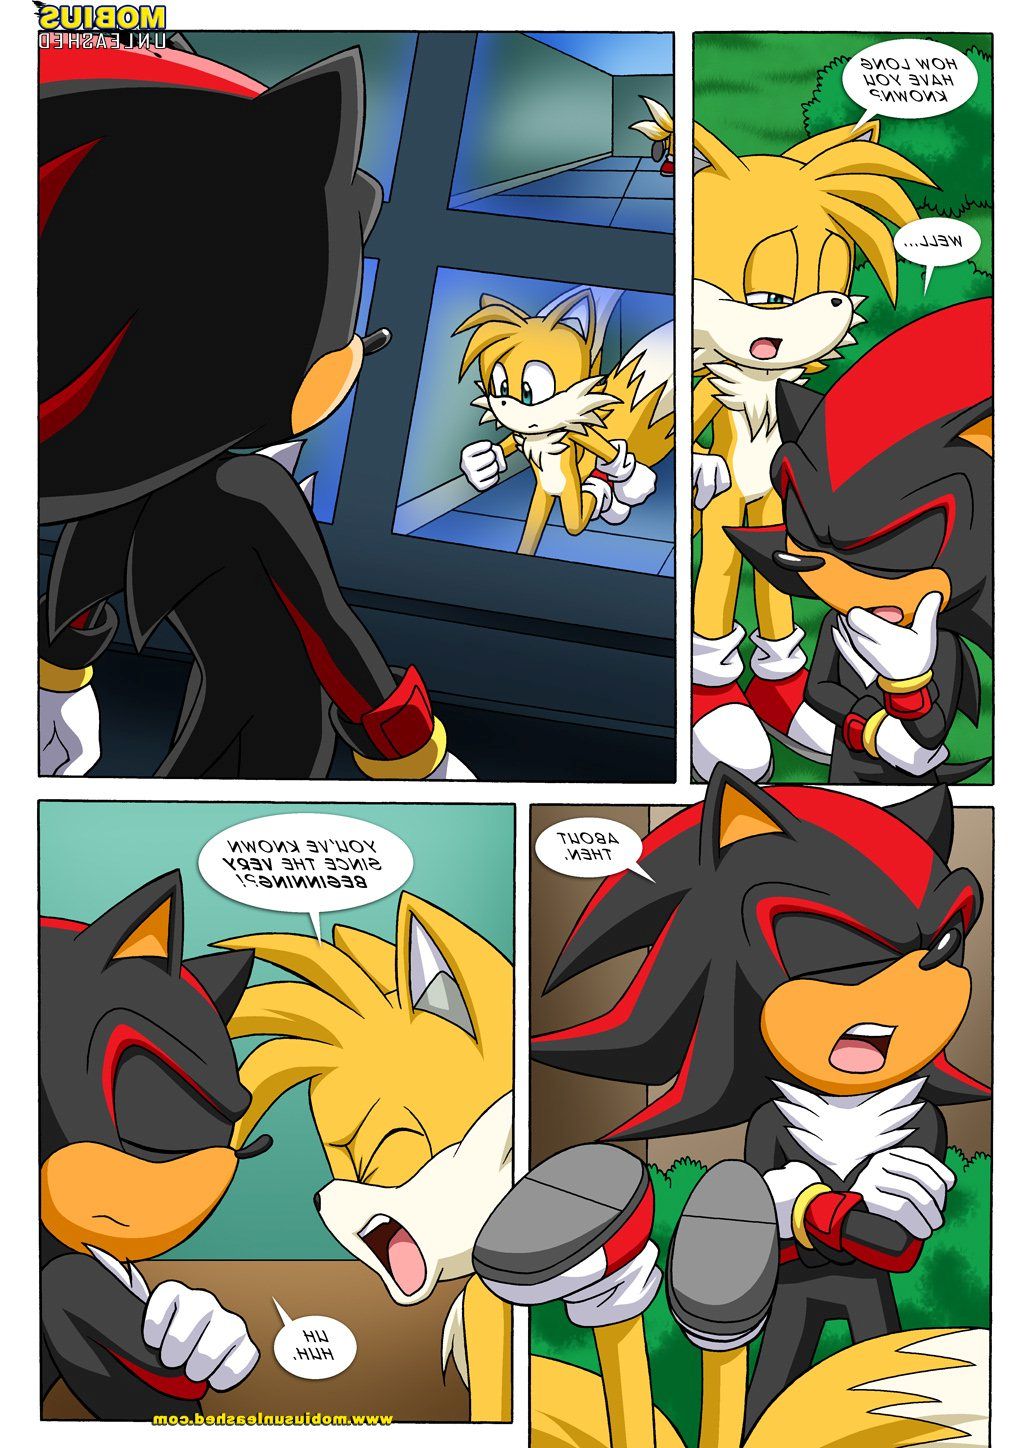 tails-tales-2 image_13431.jpg